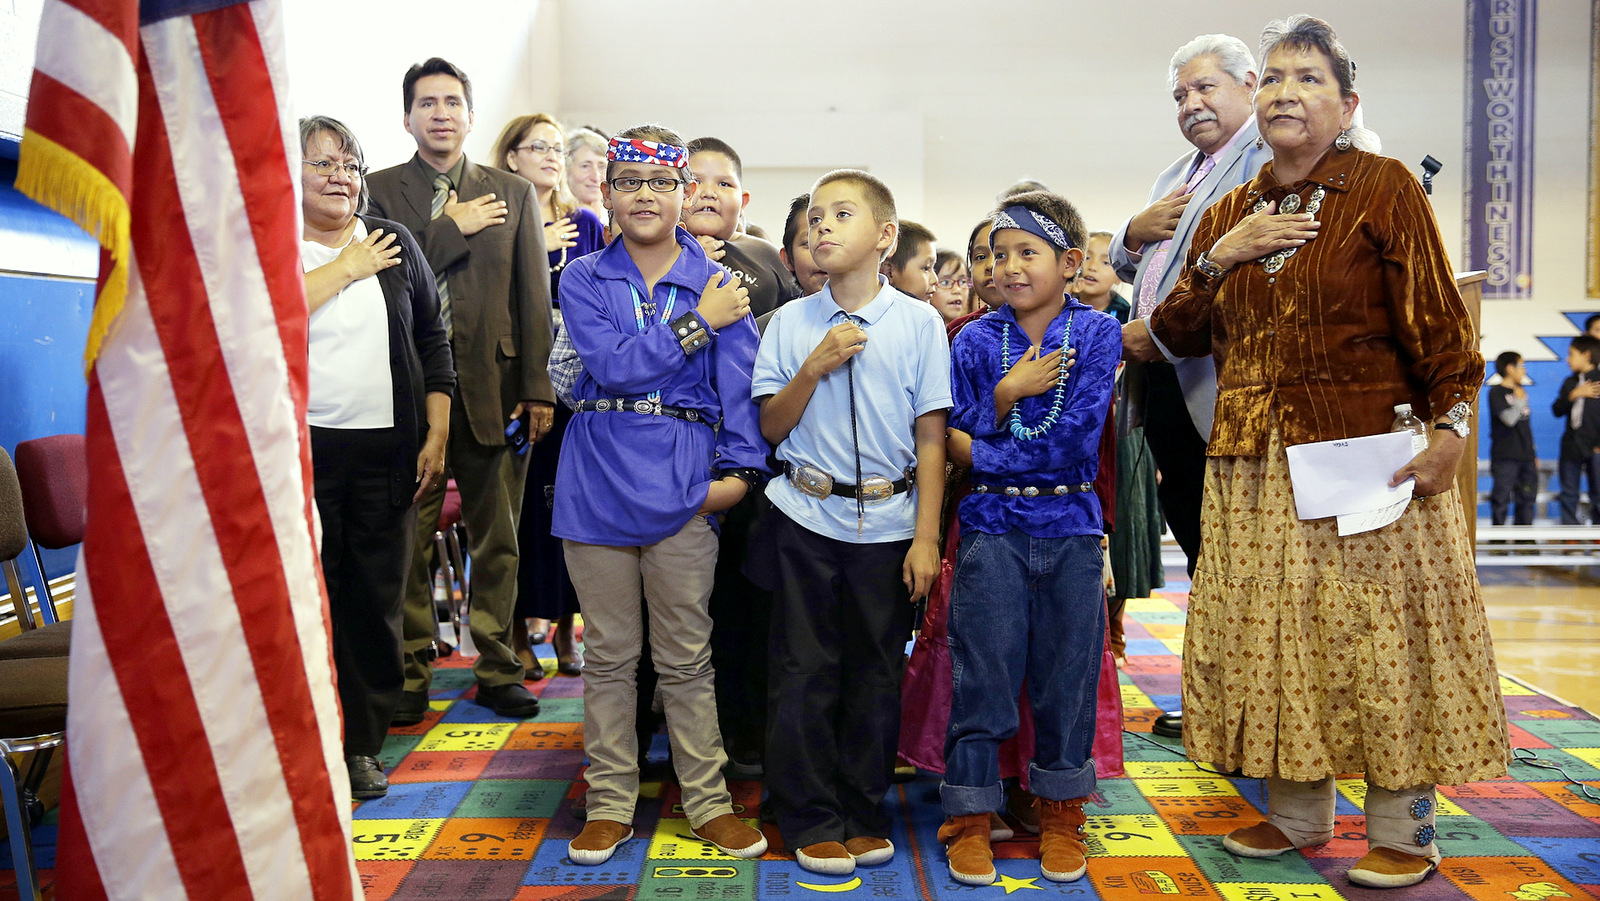 In this Sept. 26, 2014 file photo, students and faculty recite the "Pledge of Allegiance" during an assembly at the Crystal Boarding School in Crystal, N.M., on the Navajo Nation. (AP/John Locher)